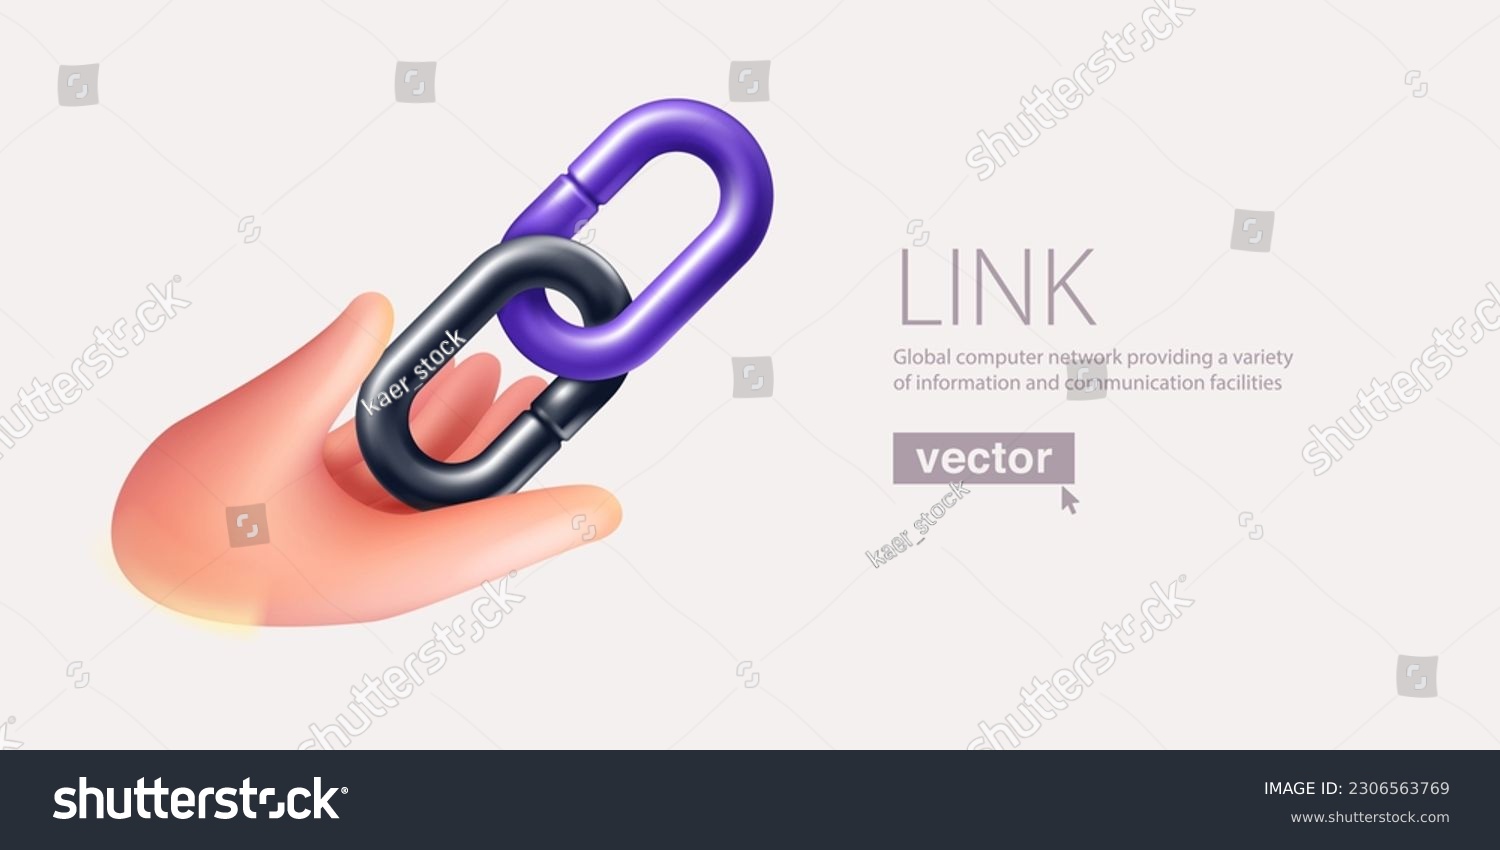 SVG of Hand holding chain links in 3D cartoon plastic style. Realistic vector hyperlink icon render. Teamwork emblem. Connection symbol for your blockchain design, hotspot logo, crypto currency app, NFT UI. svg